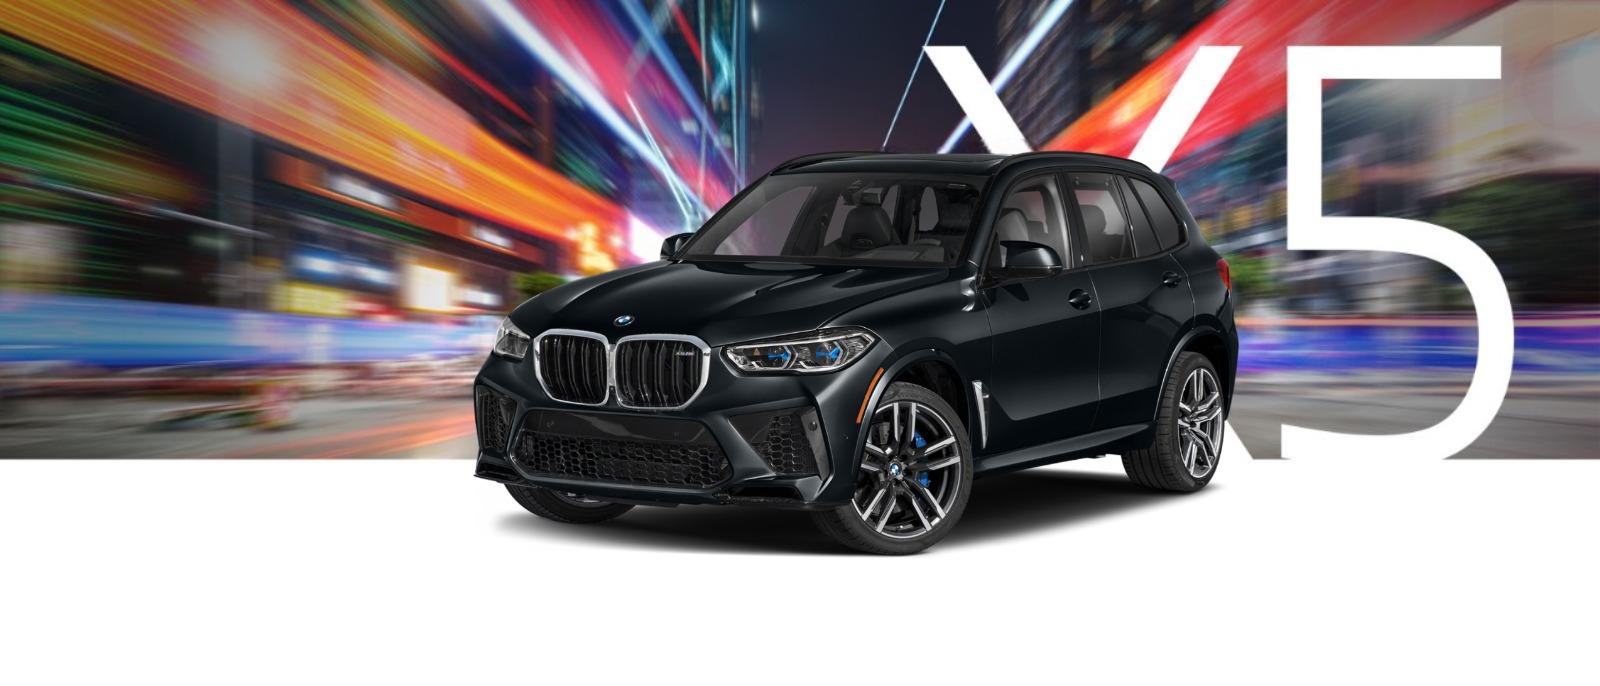 A black BMW X5 on a city street at night with streaks of light.